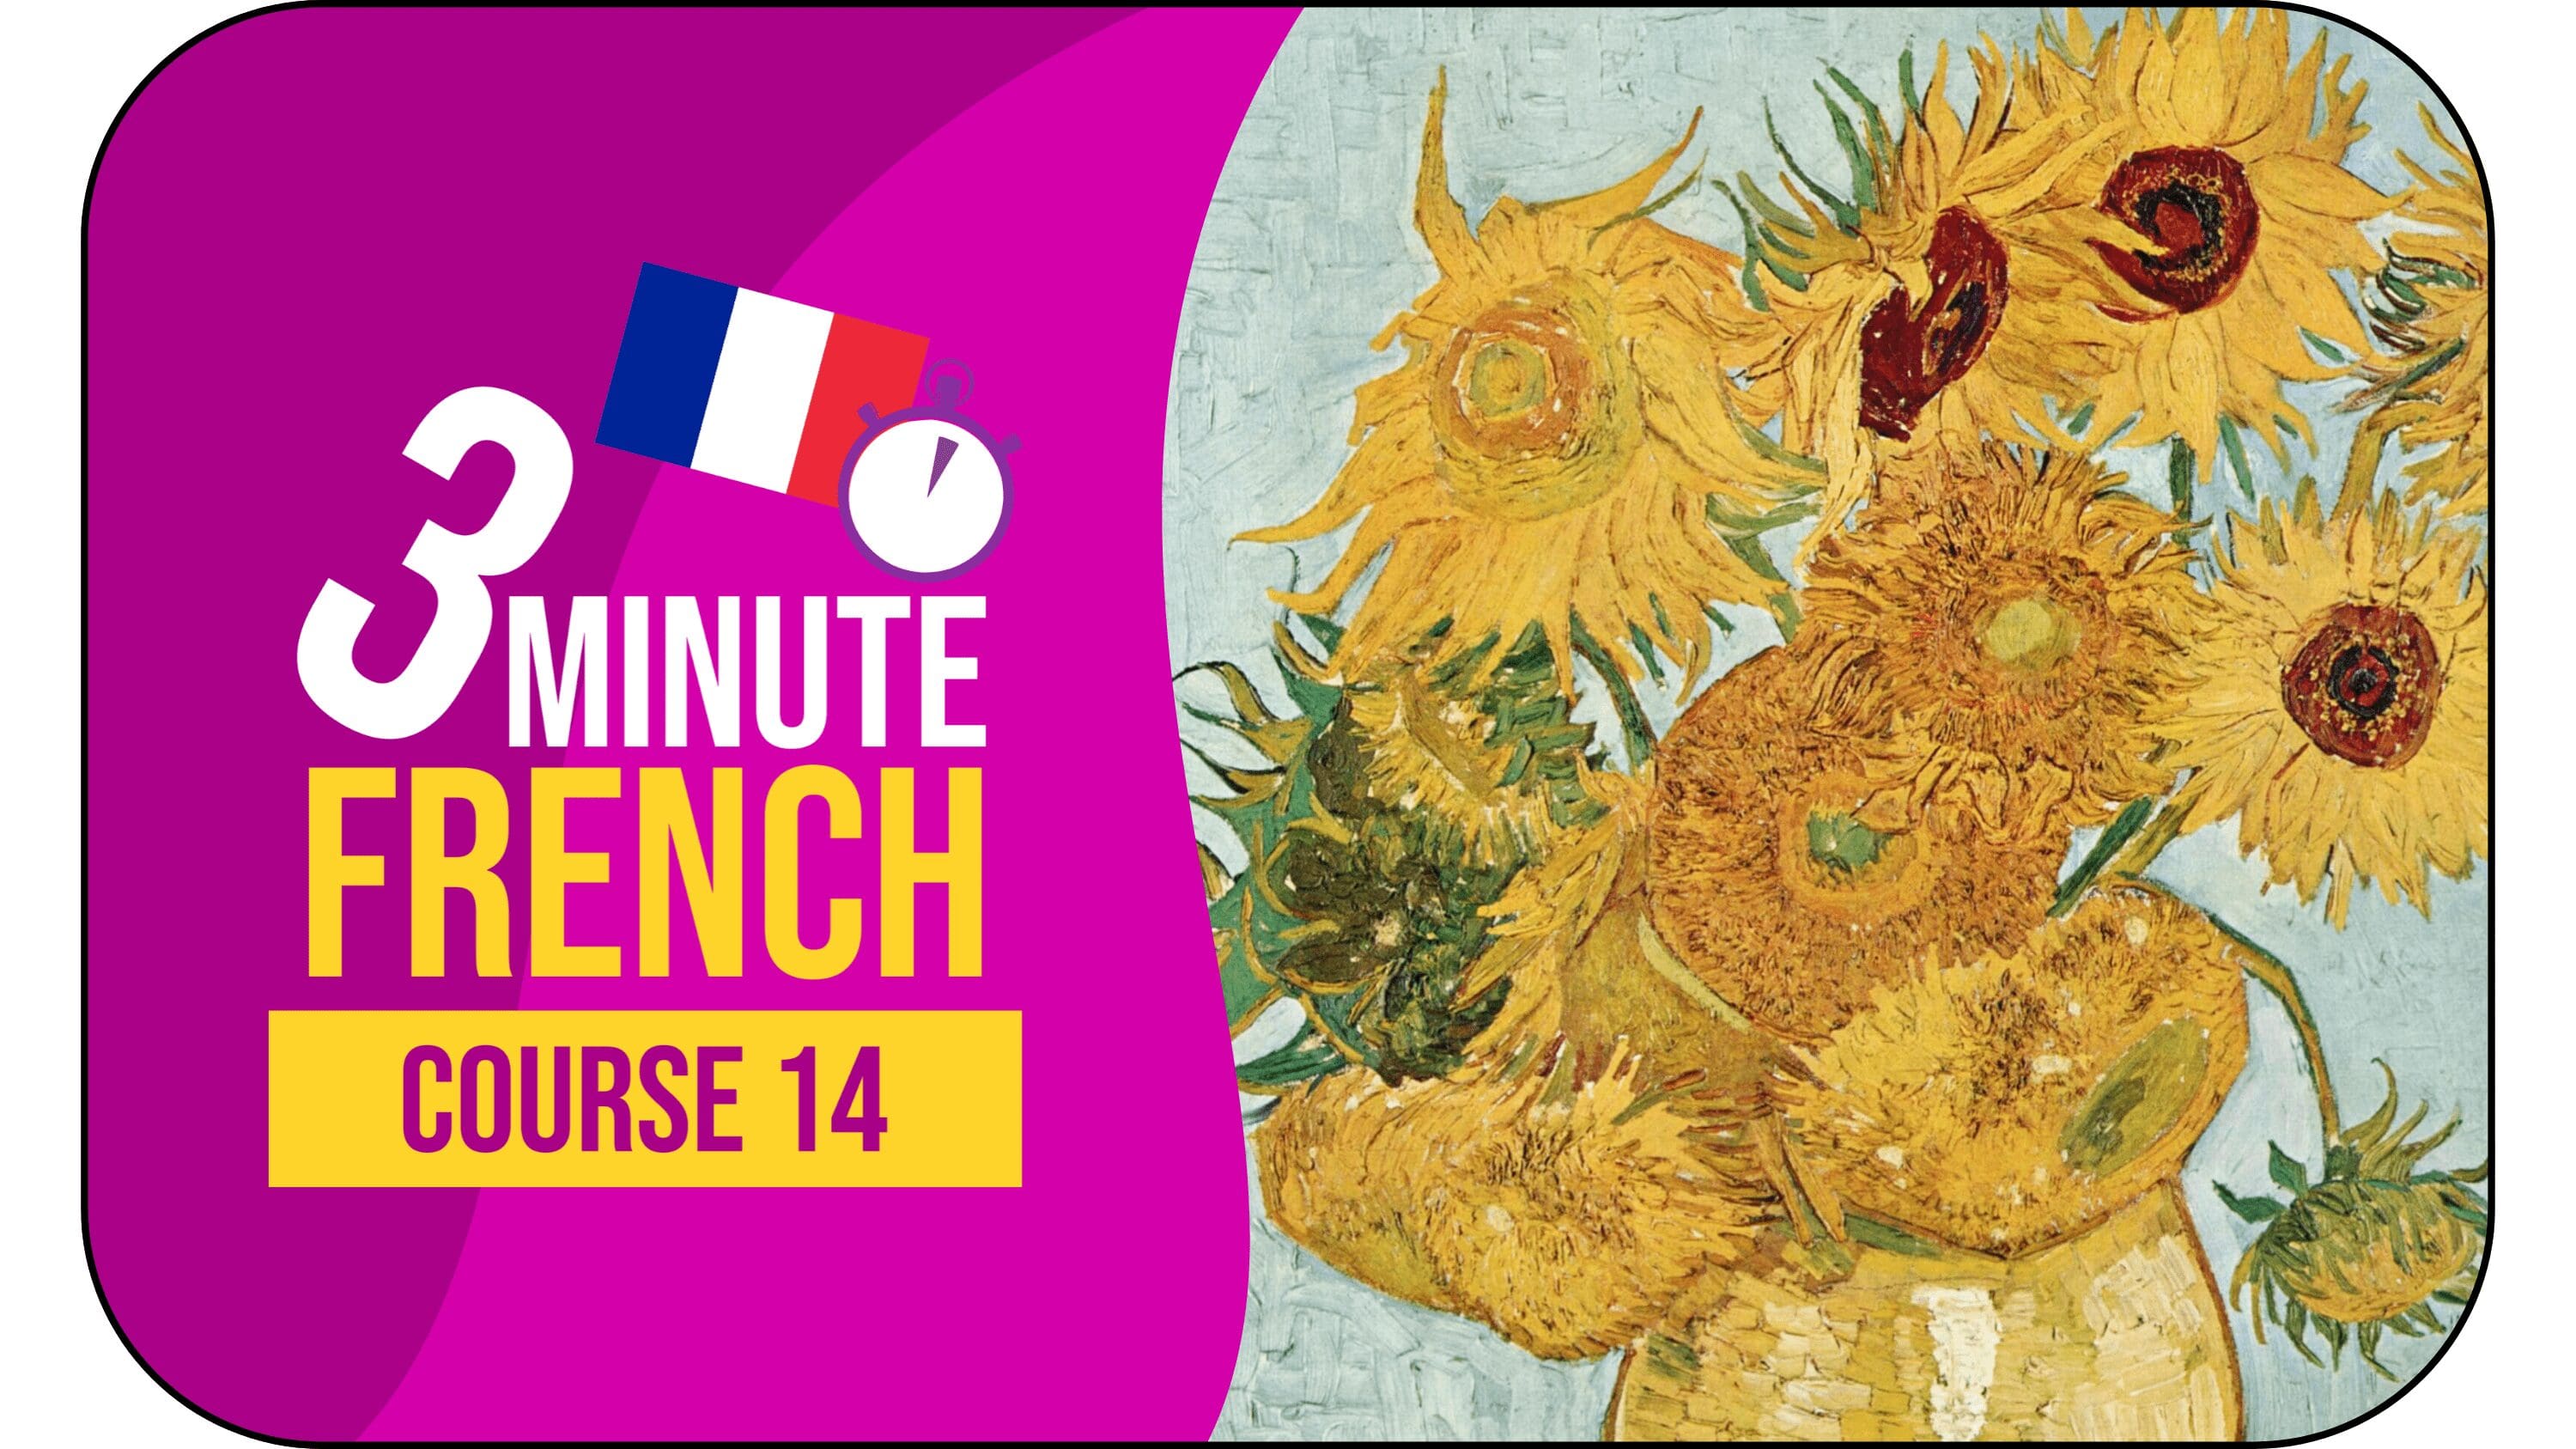 3 Minute French - Course 14